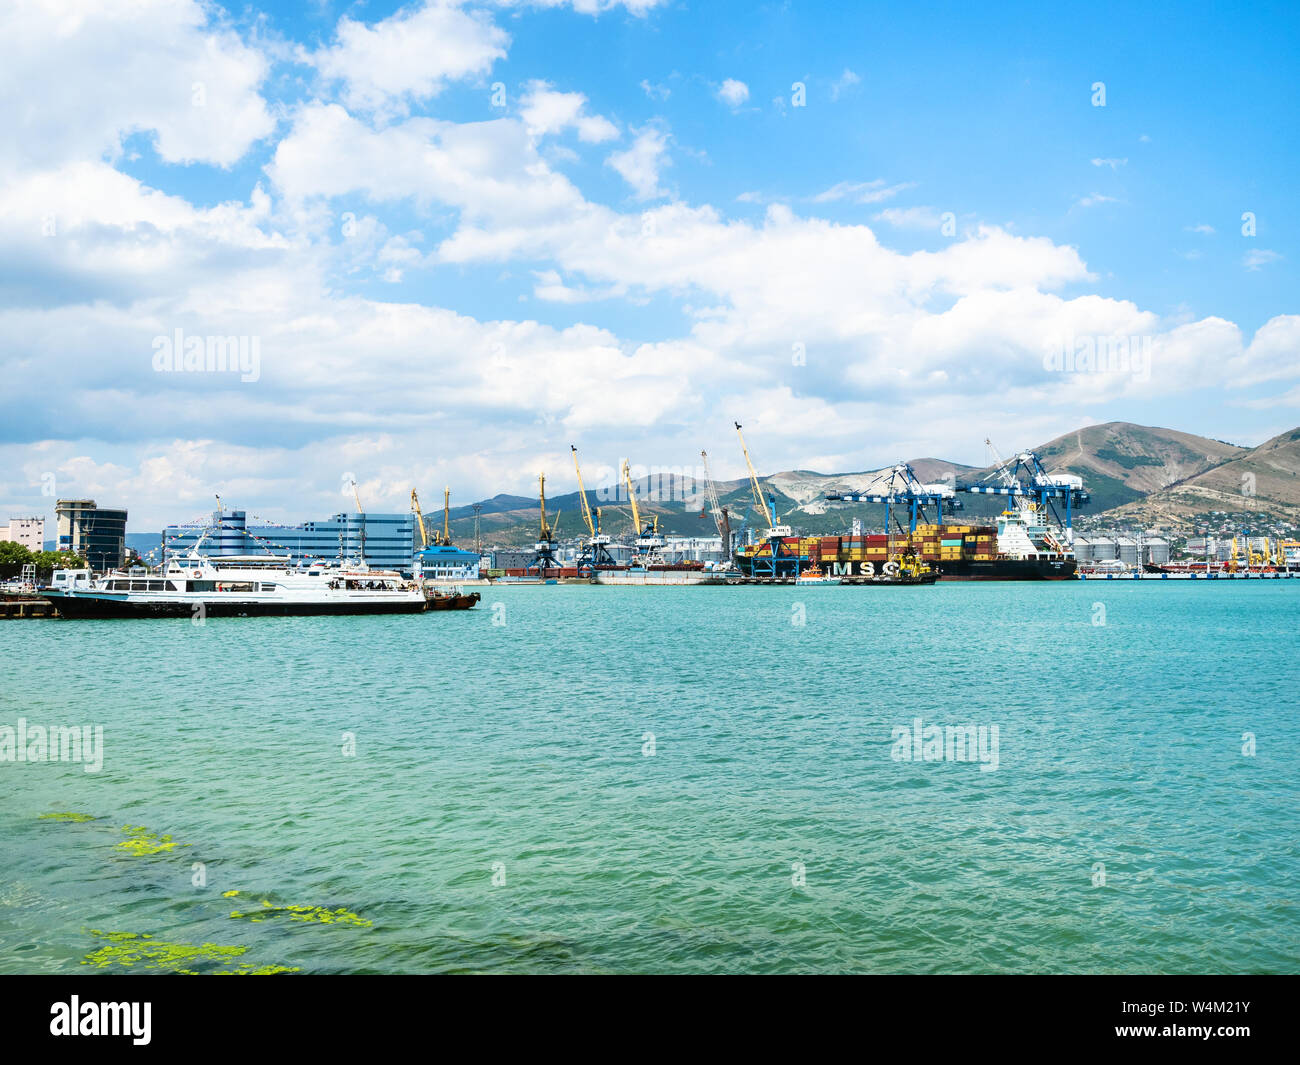 NOVOROSSIYSK, RUSSIA - JULY 7, 2019: ships in sea port in Novorossiysk. Novorossiysk is city in Krasnodar Krai, Russia, it is main country's port on B Stock Photo